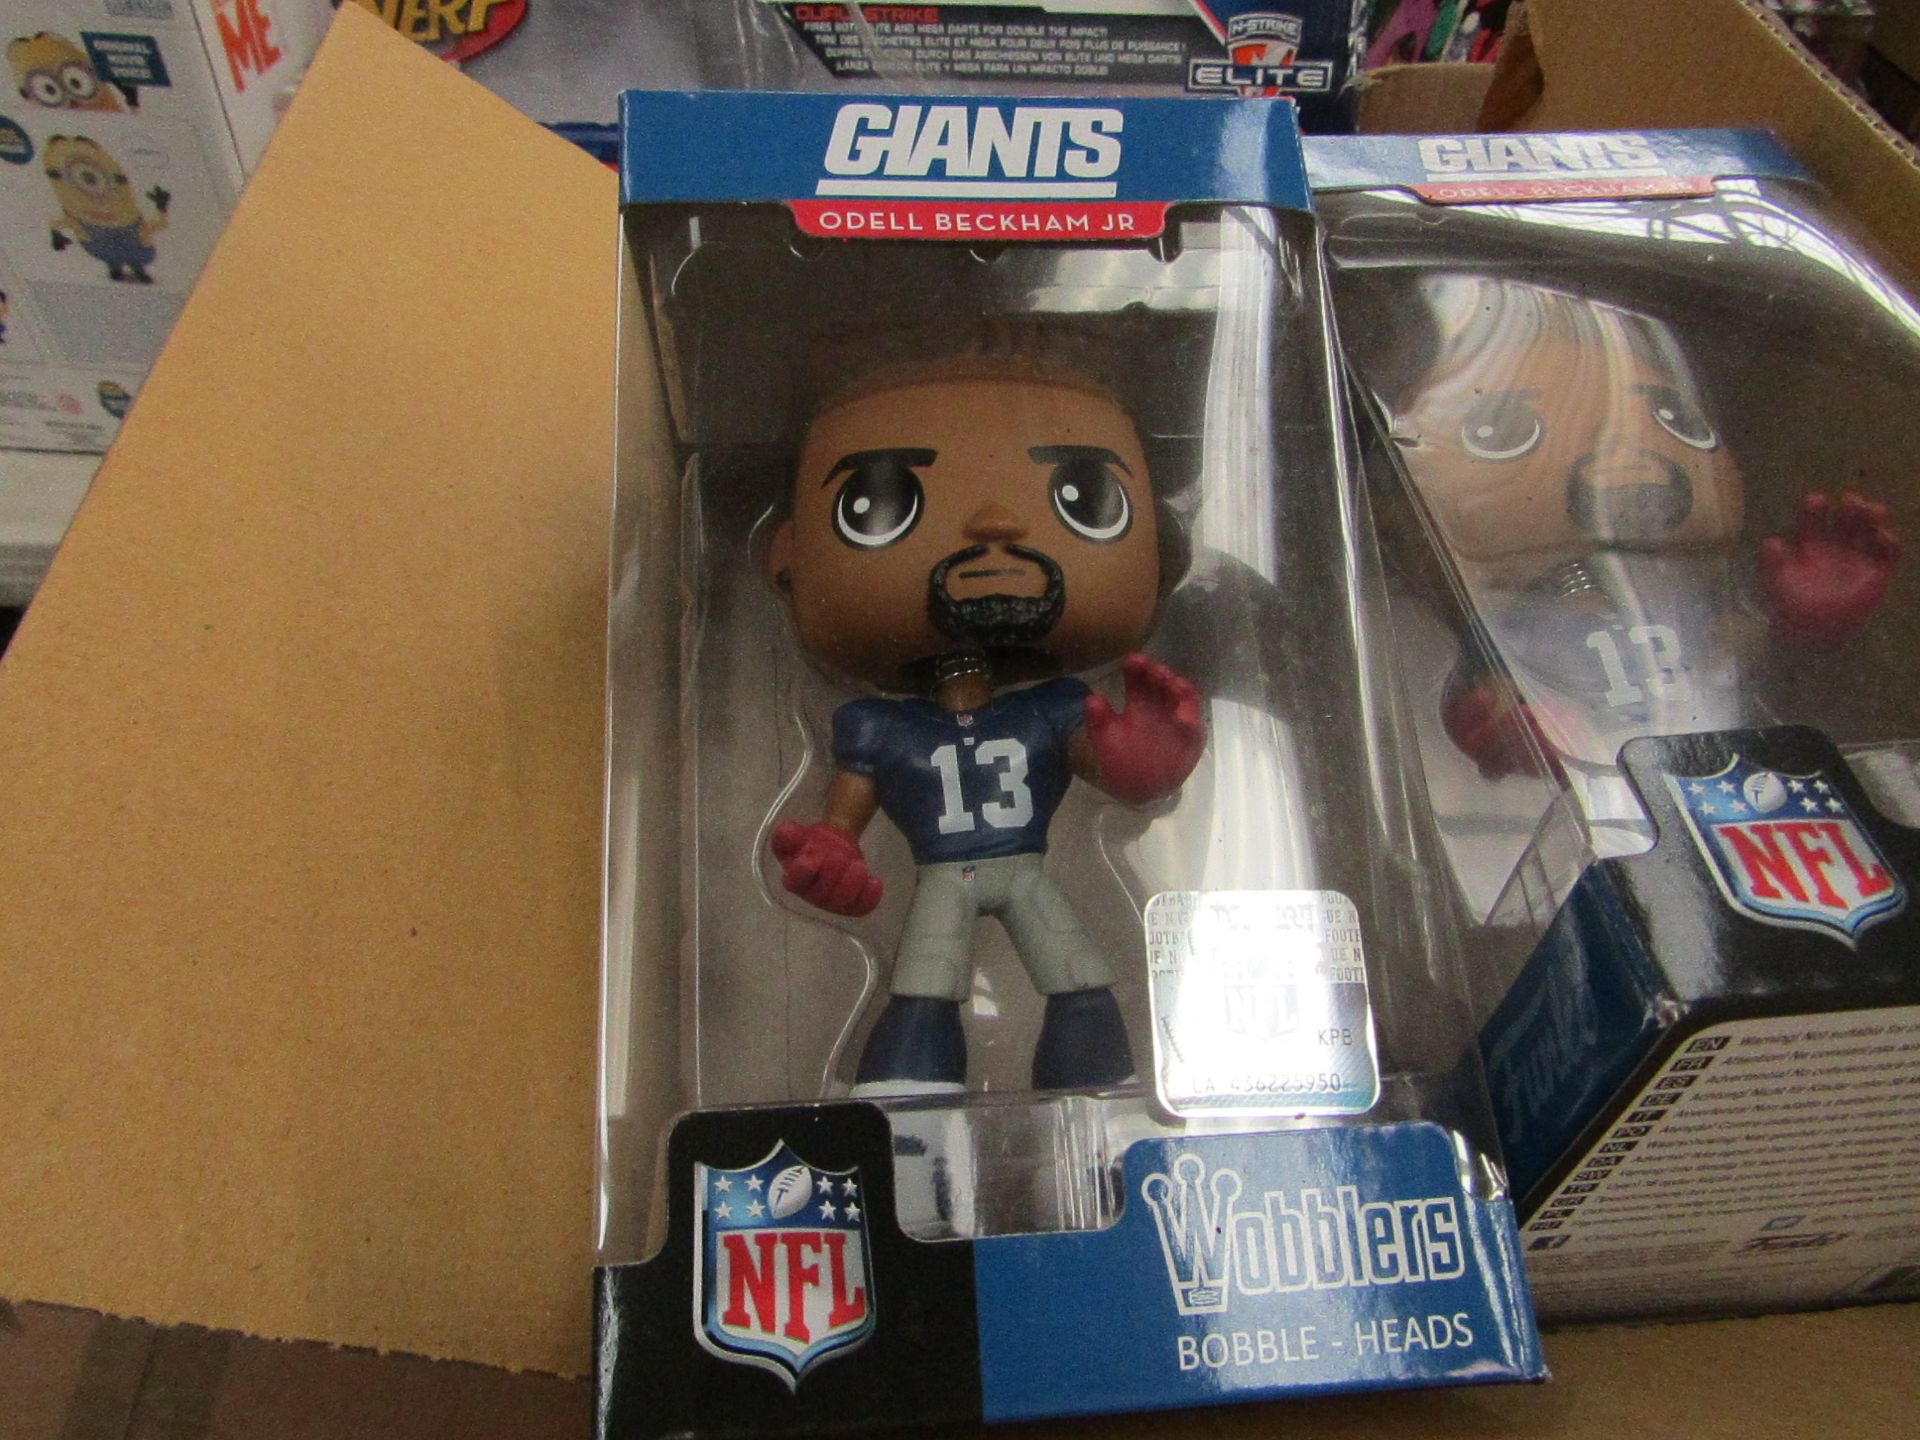 2 x Wobblers Giants Odell Beckham Figures. New & Boxed